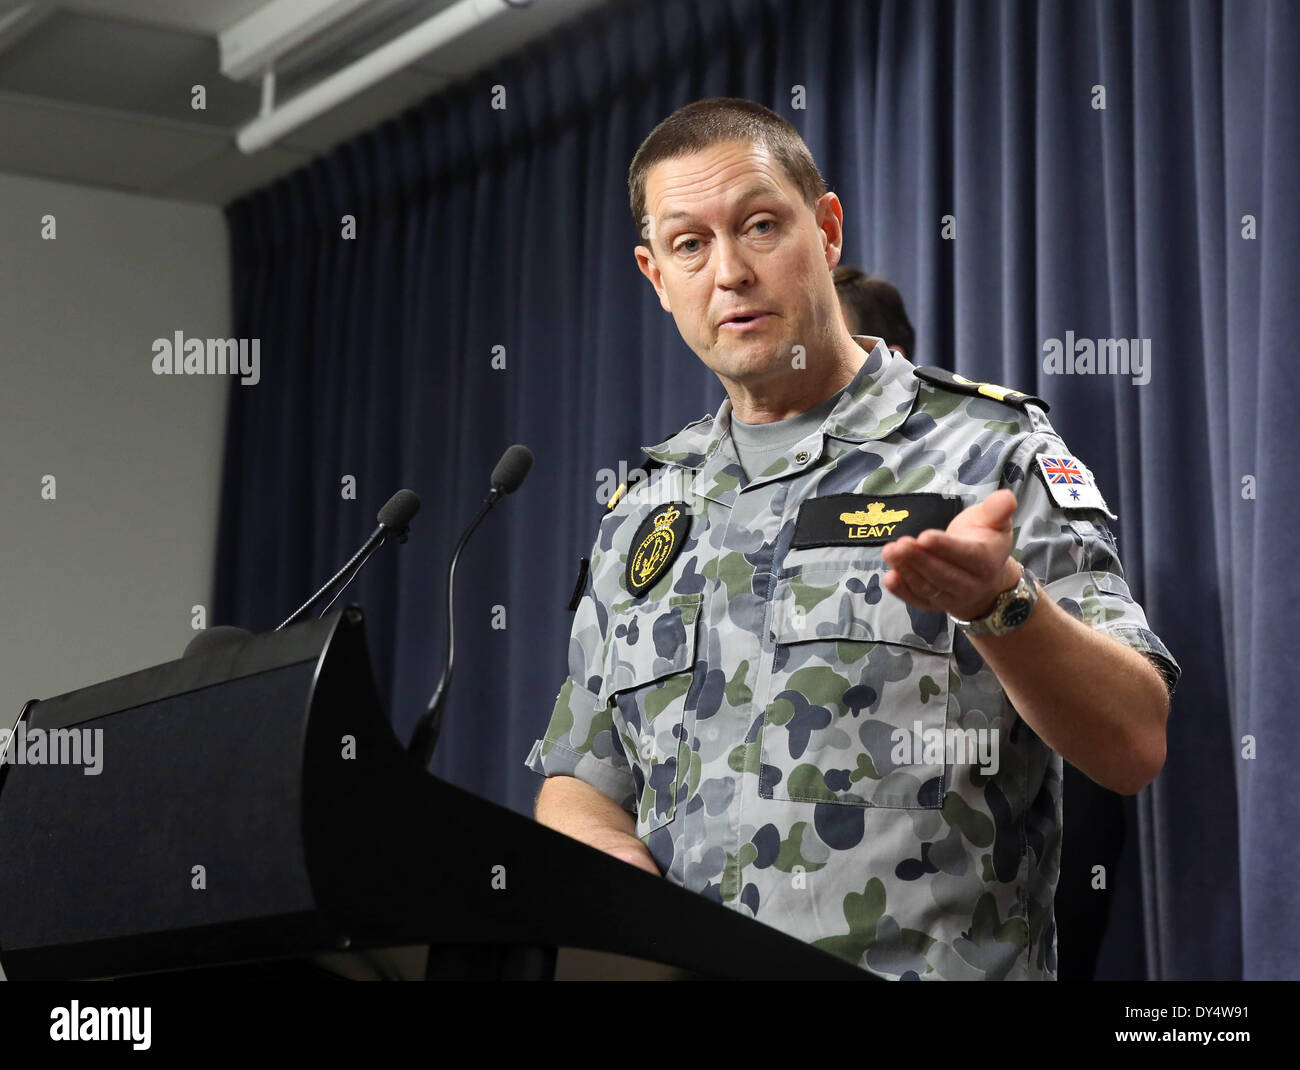 Perth, Australia. 7th Apr, 2014. Australia's search task force commander Peter Leavy speaks during a news conference in Perth, Australia, on April 7, 2014. An Australian vessel searching the missing Malaysian flight 370 has detected electronic pulse signals probably related to the black box in the Indian Ocean during the past 24 hours. However, the unsuccessful effort to reacquire the signal later may suggest the battery may finish in a very short time, according to searching officials and U.S. Navy technicians. Credit:  Xu Yanyan/Xinhua/Alamy Live News Stock Photo